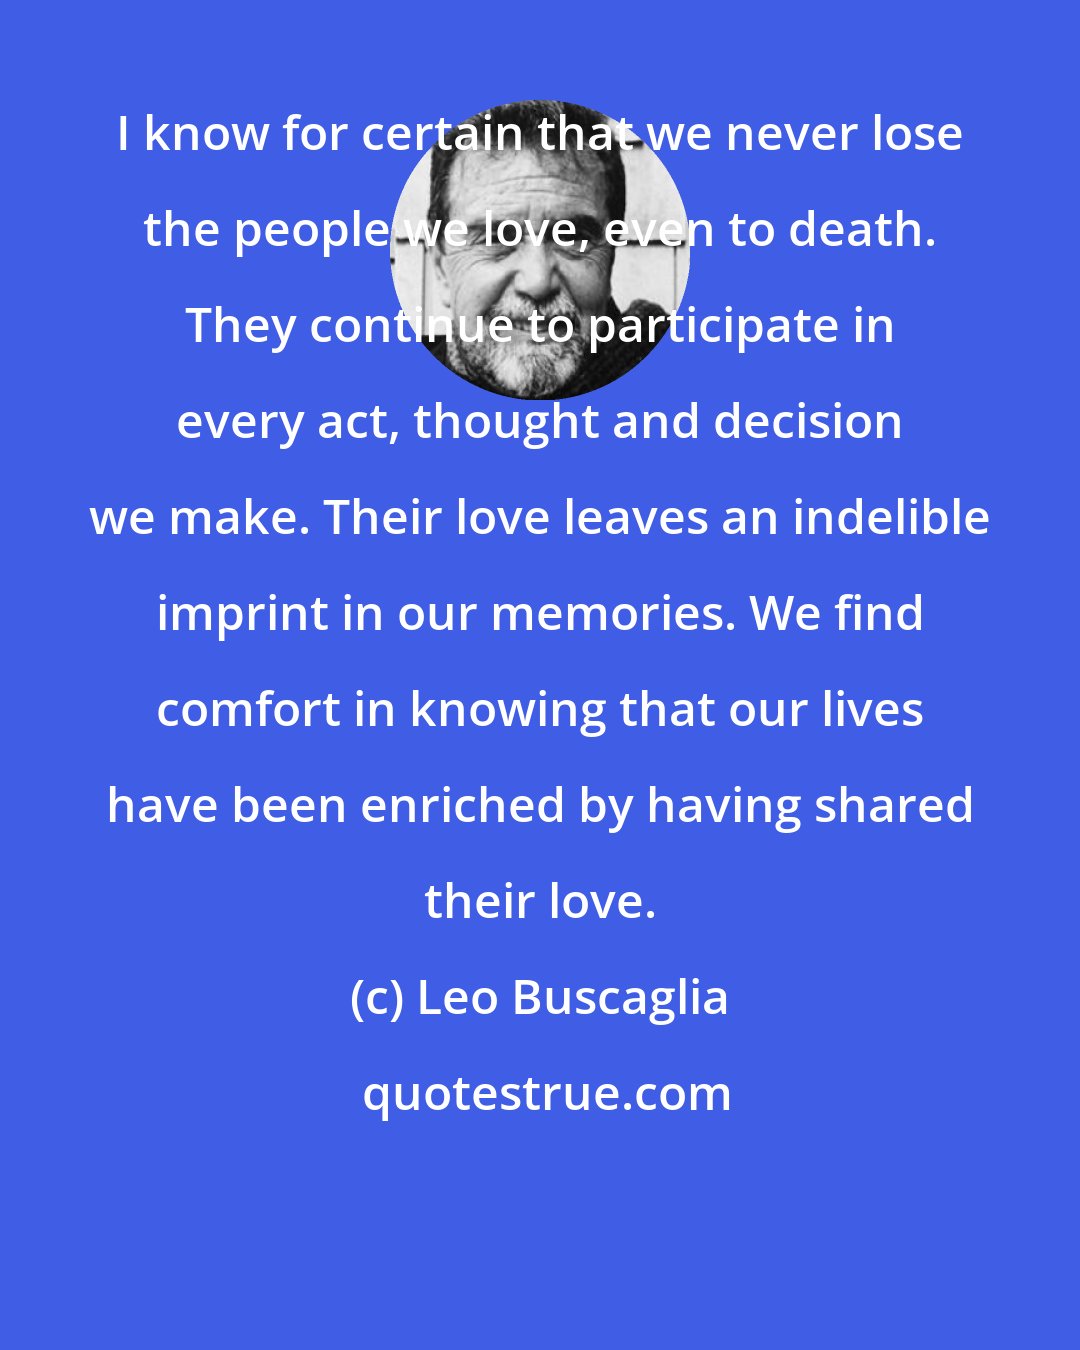 Leo Buscaglia: I know for certain that we never lose the people we love, even to death. They continue to participate in every act, thought and decision we make. Their love leaves an indelible imprint in our memories. We find comfort in knowing that our lives have been enriched by having shared their love.